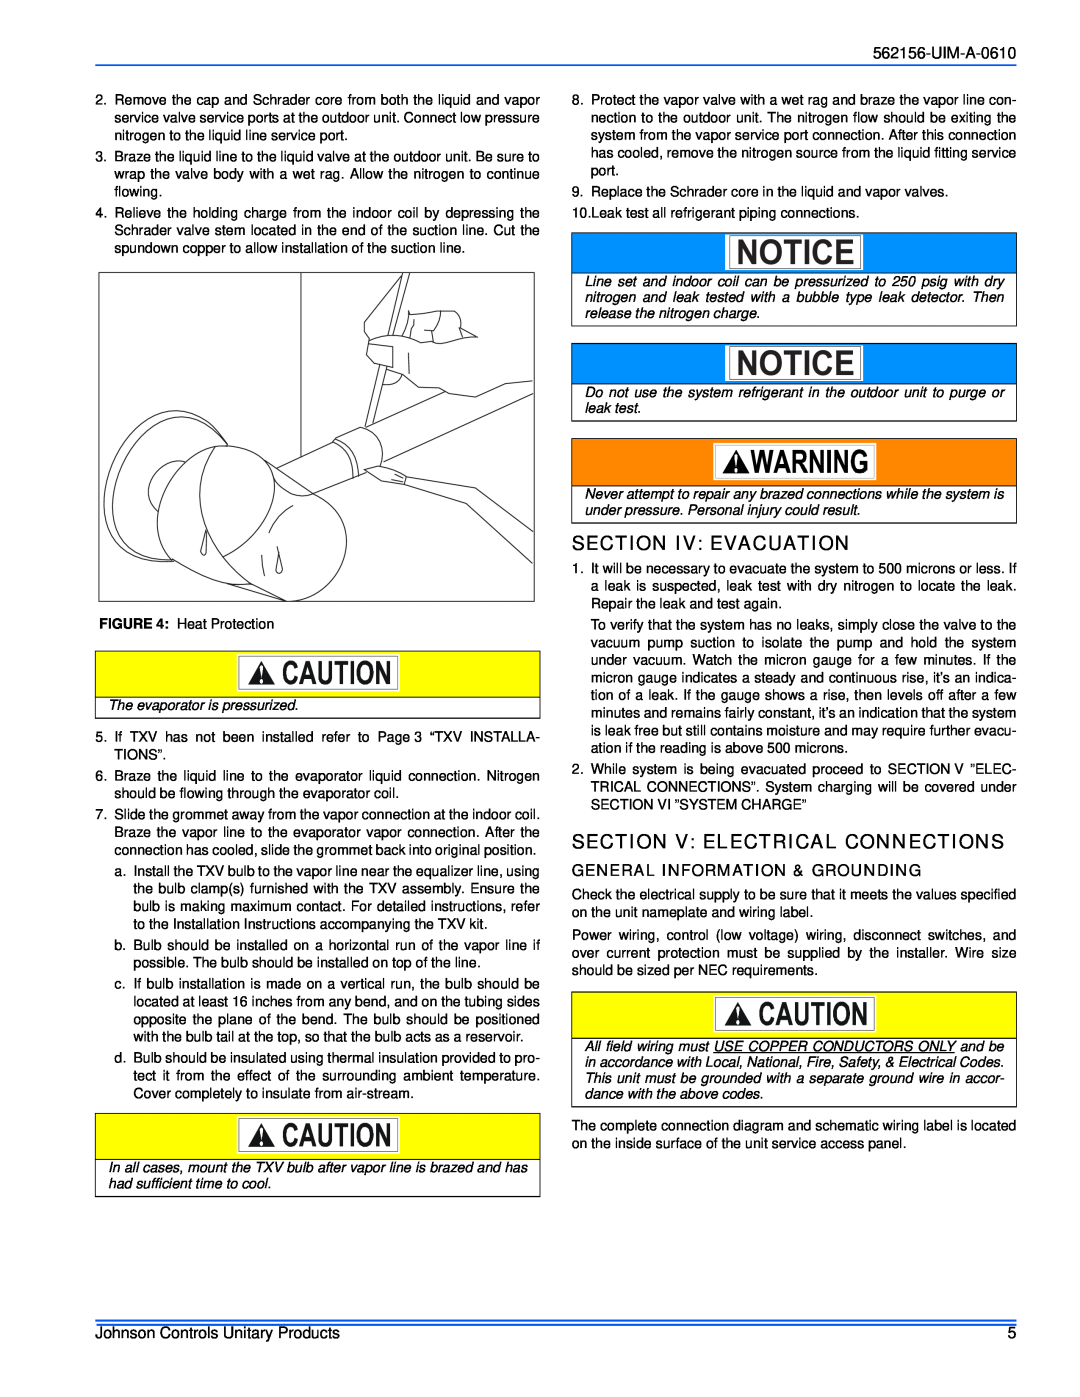 Johnson Controls AL6B SERIES Section Iv Evacuation, Section V Electrical Connections, General Information & Grounding 